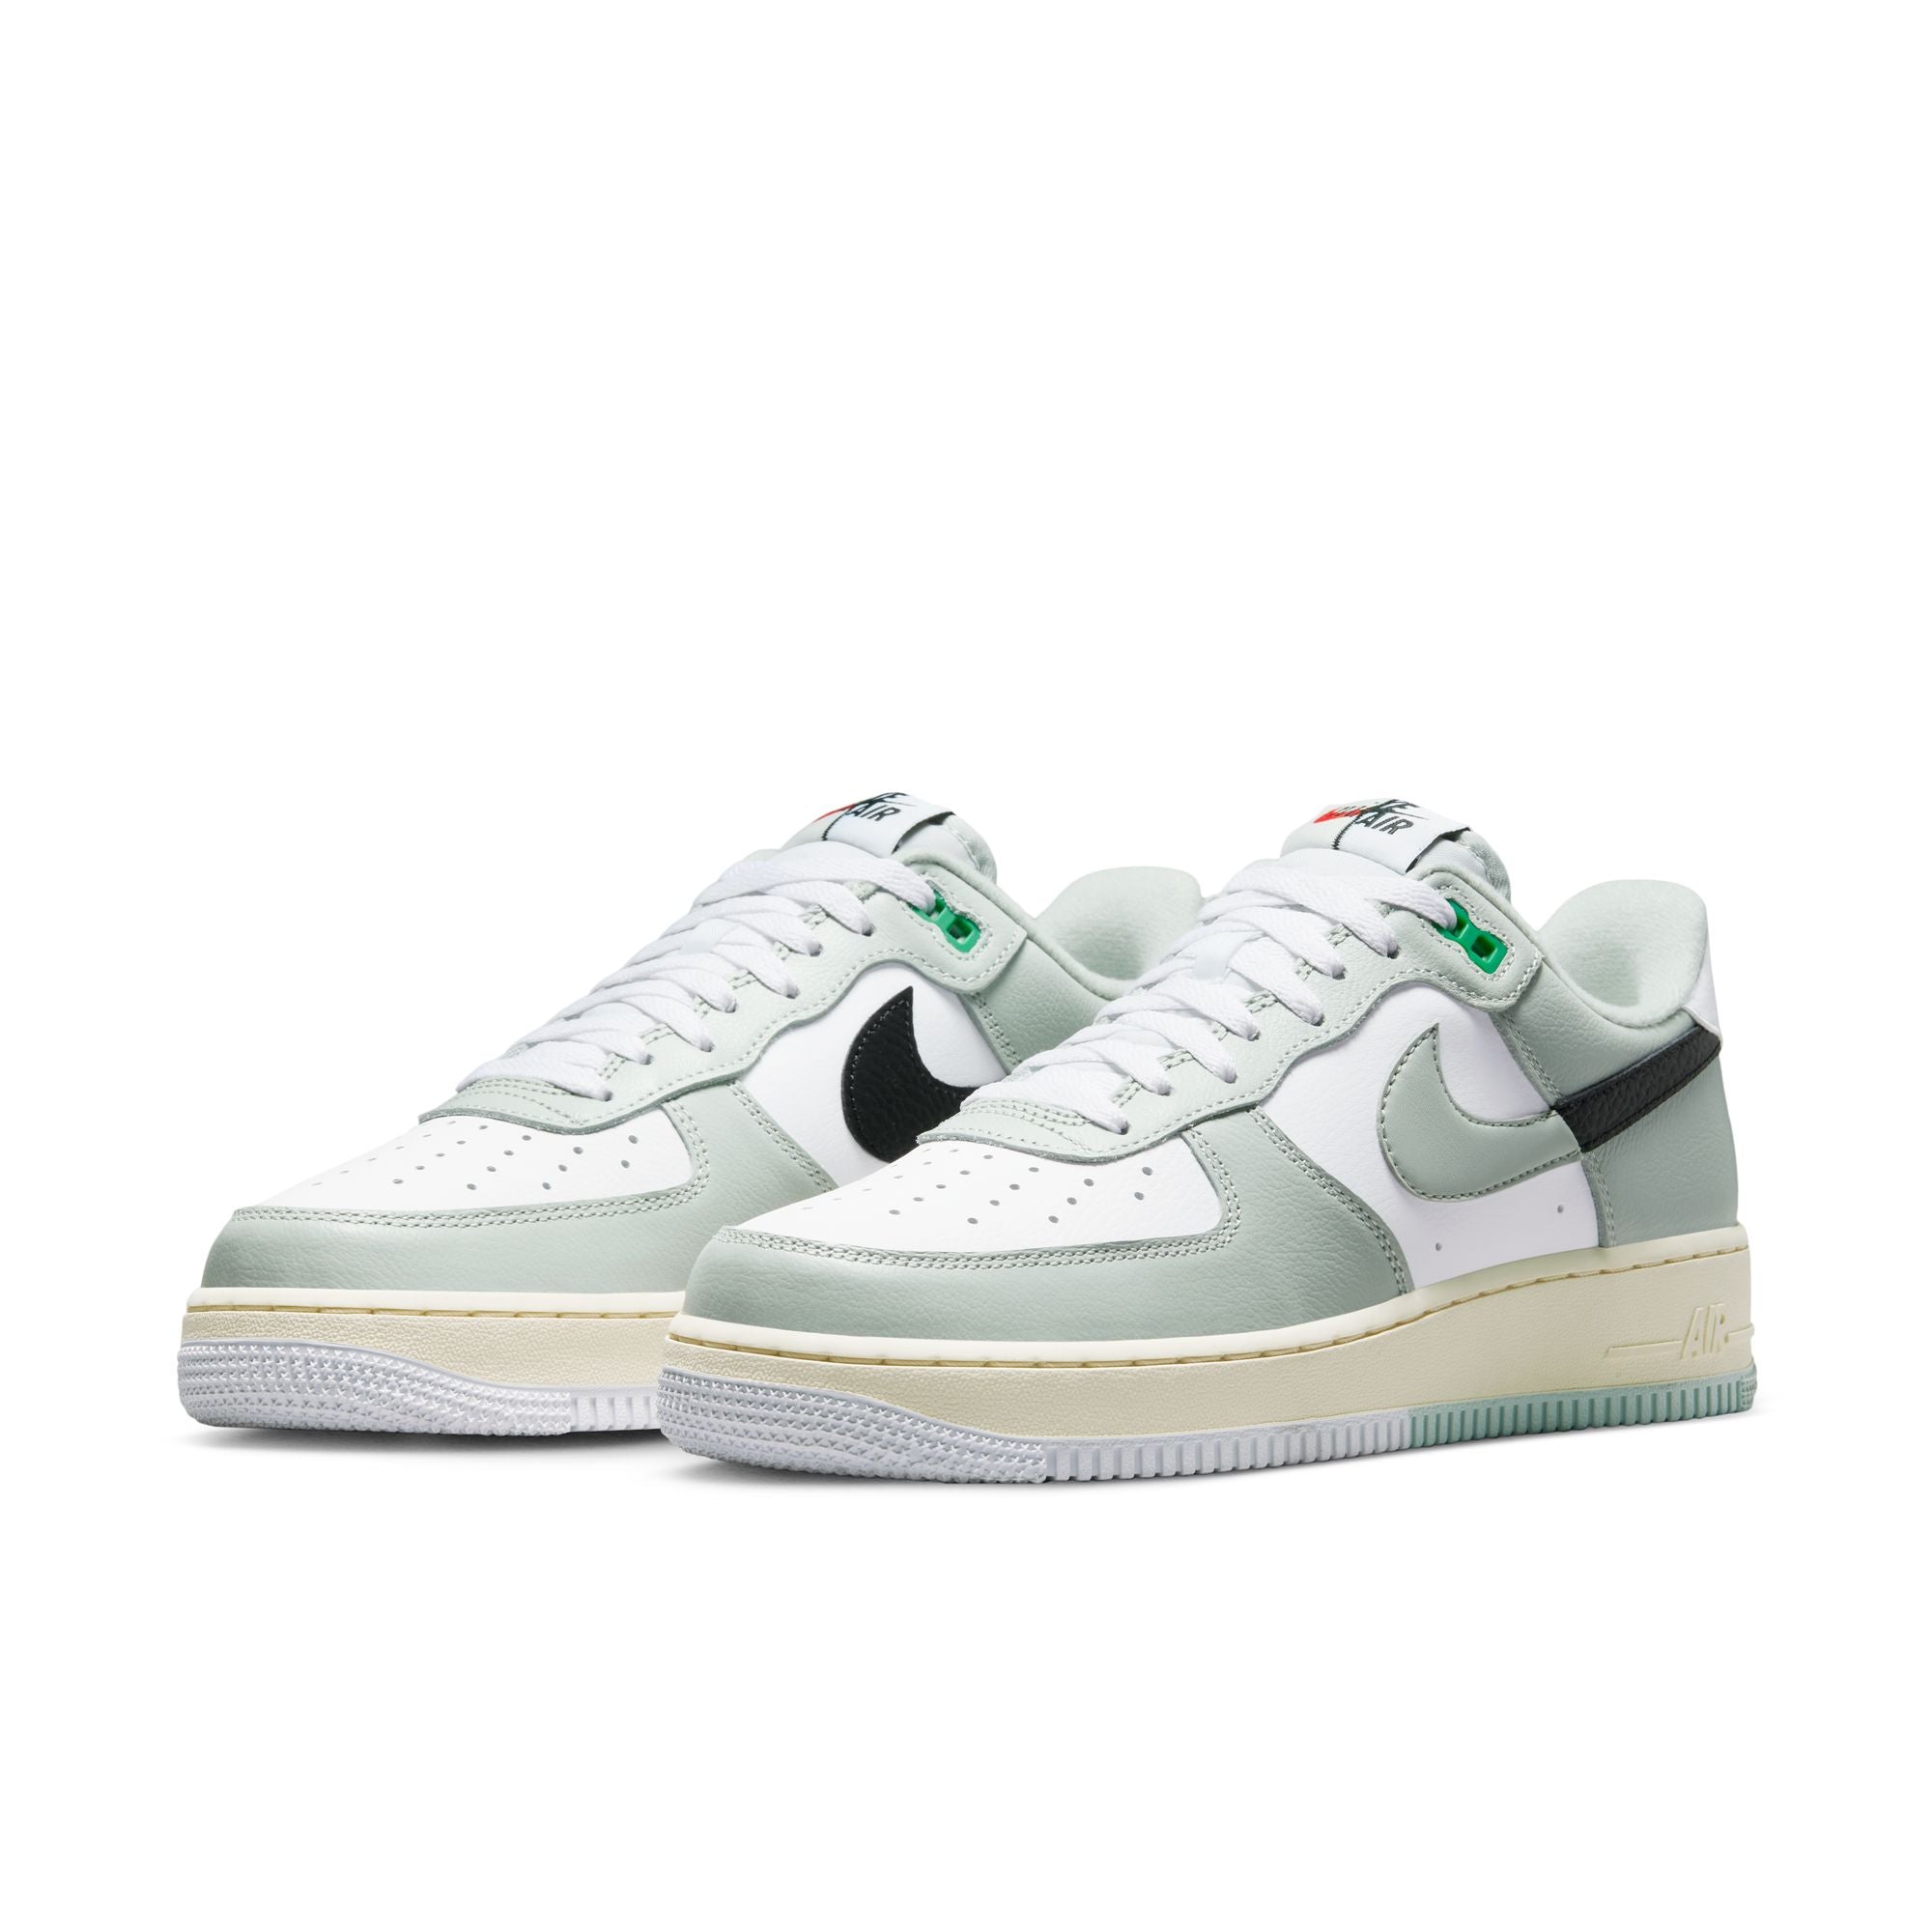 Nike Air Force 1 High '07 LV8 Pistachio Frost/Multi-Color